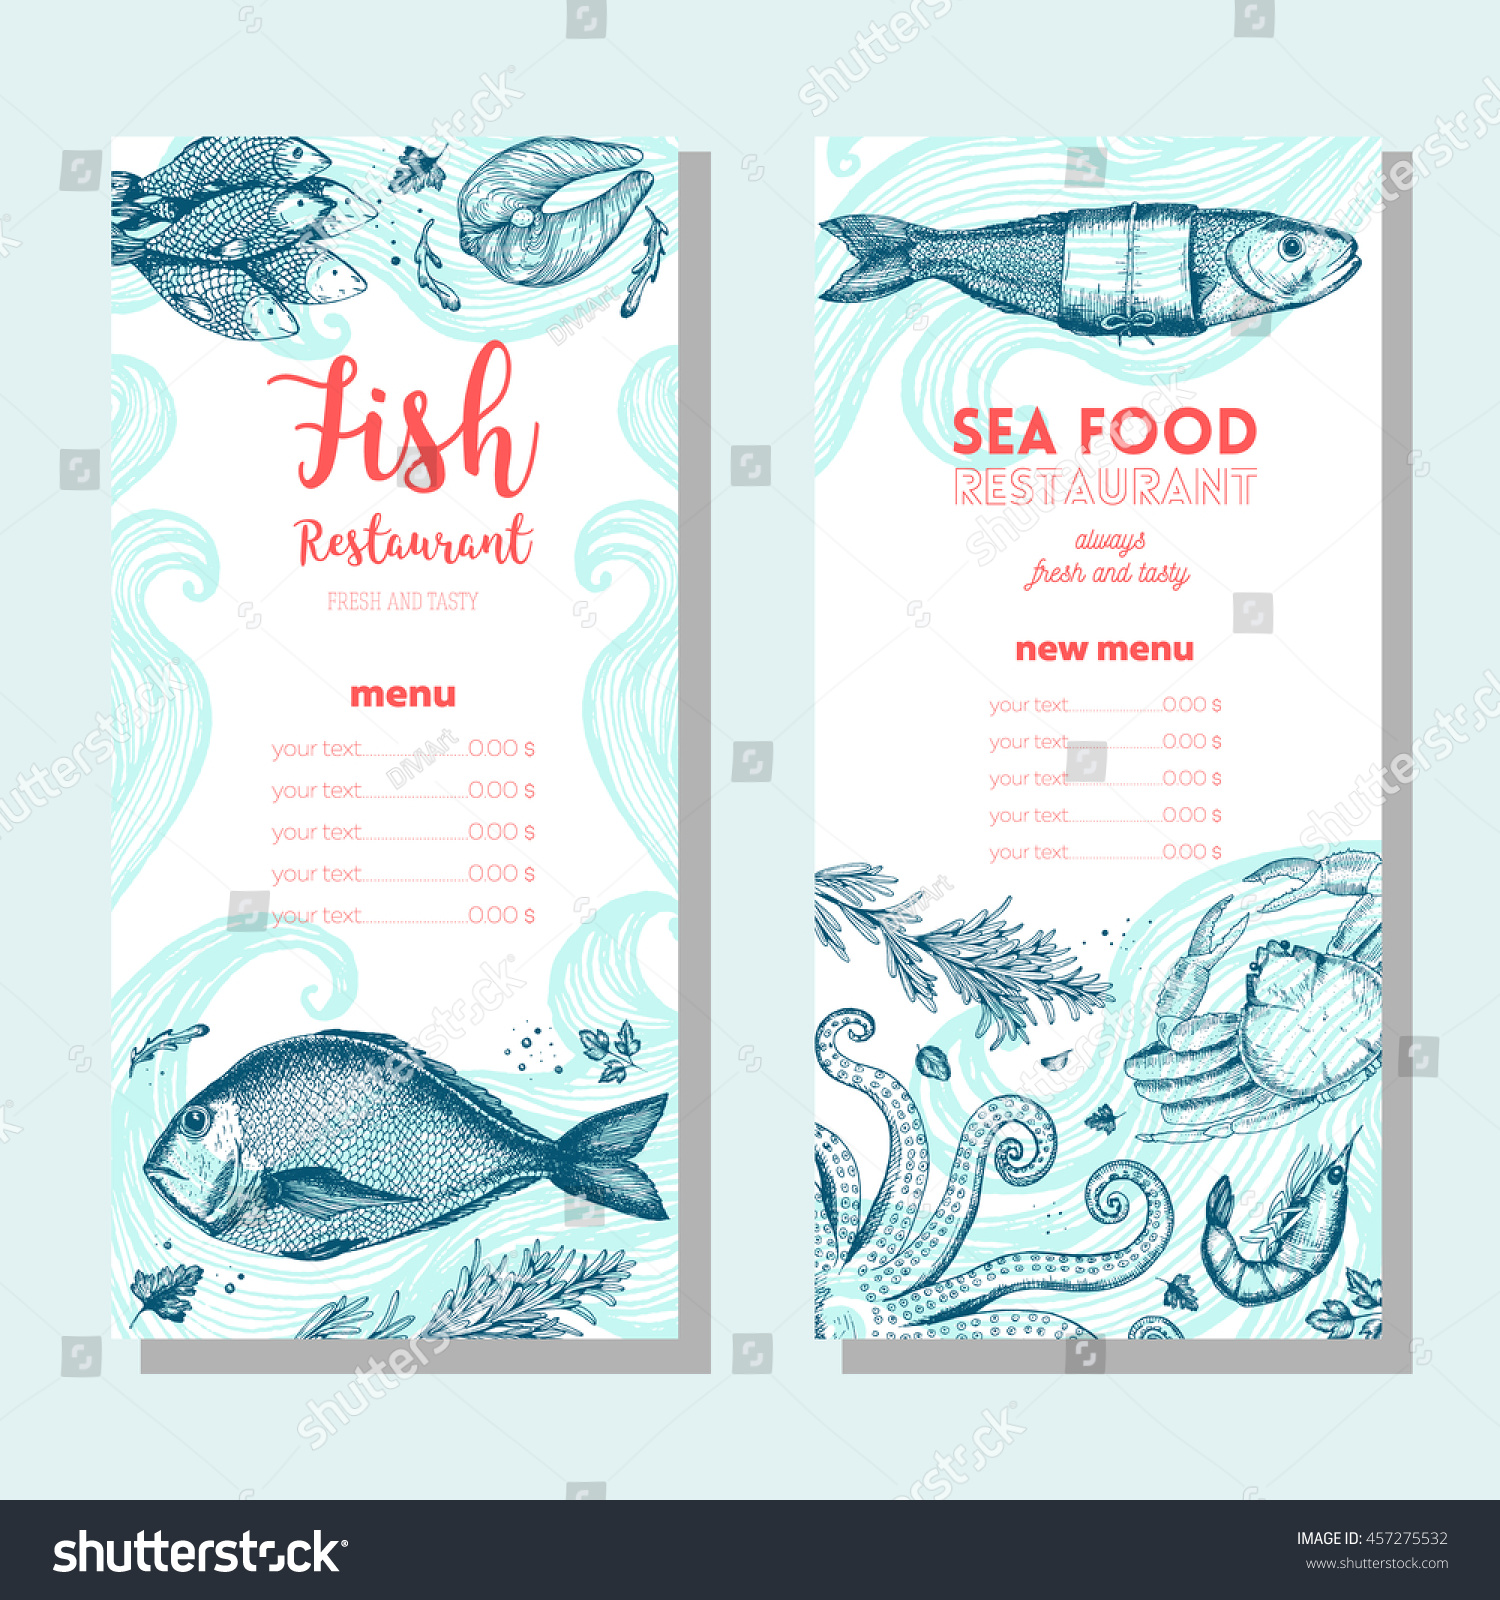 Seafood Vintage Design Template Vertical Banners Stock Vector (Royalty ...